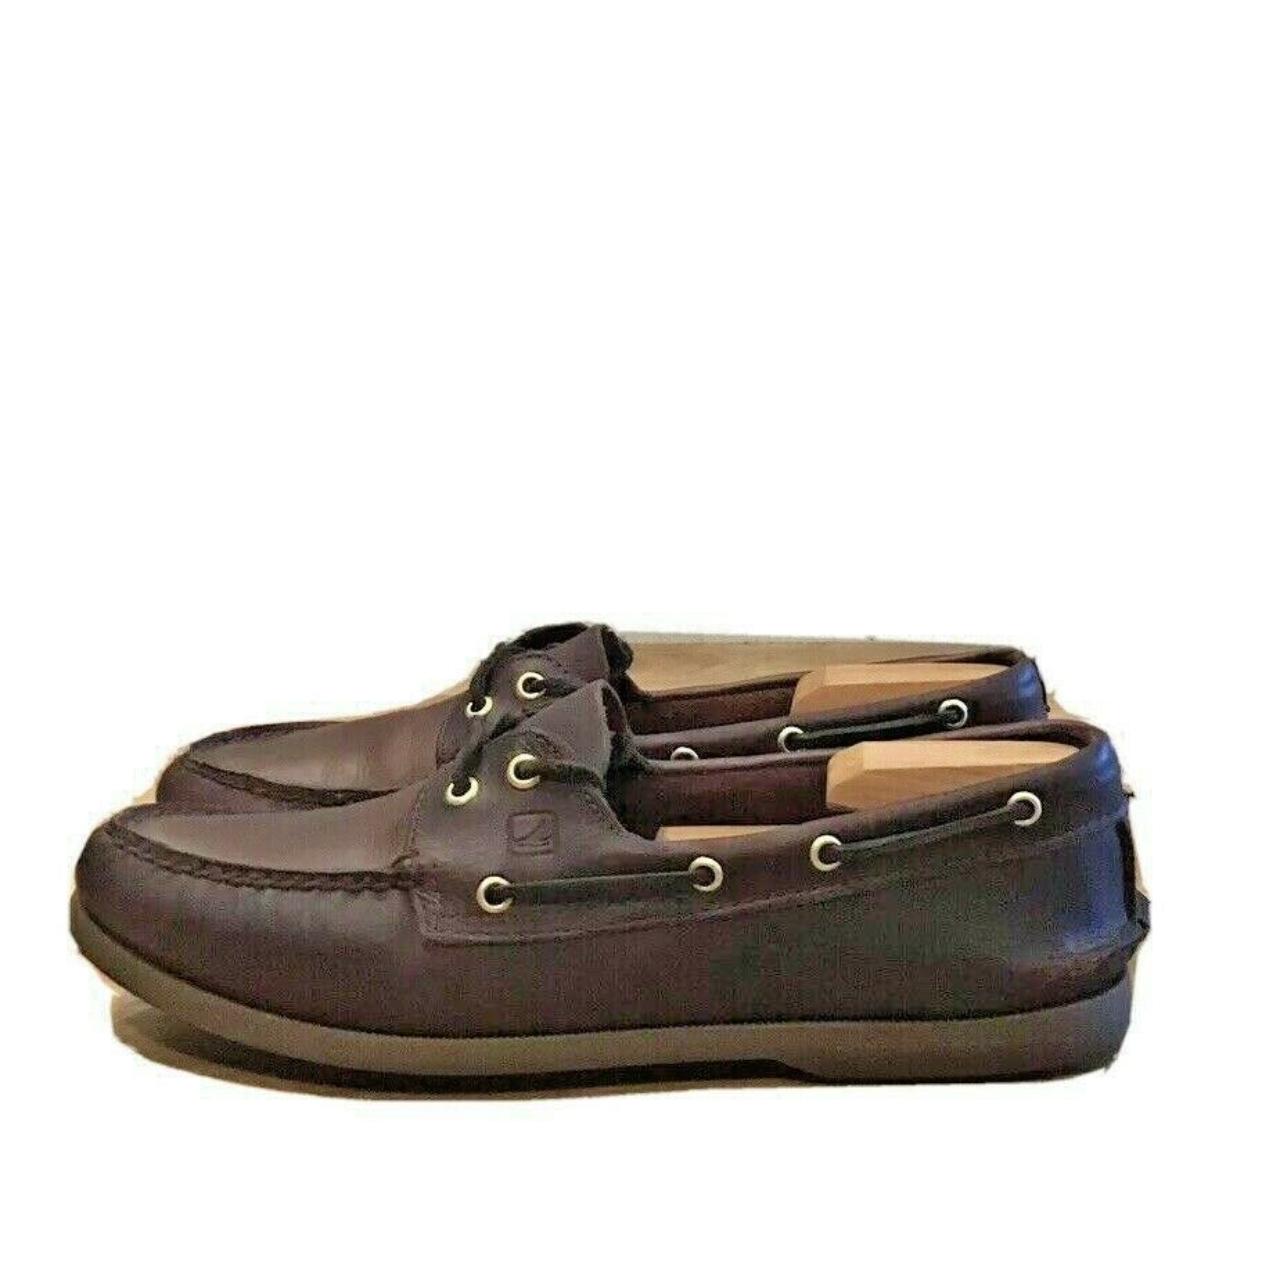 Sperry Men's Brown Boat-shoes